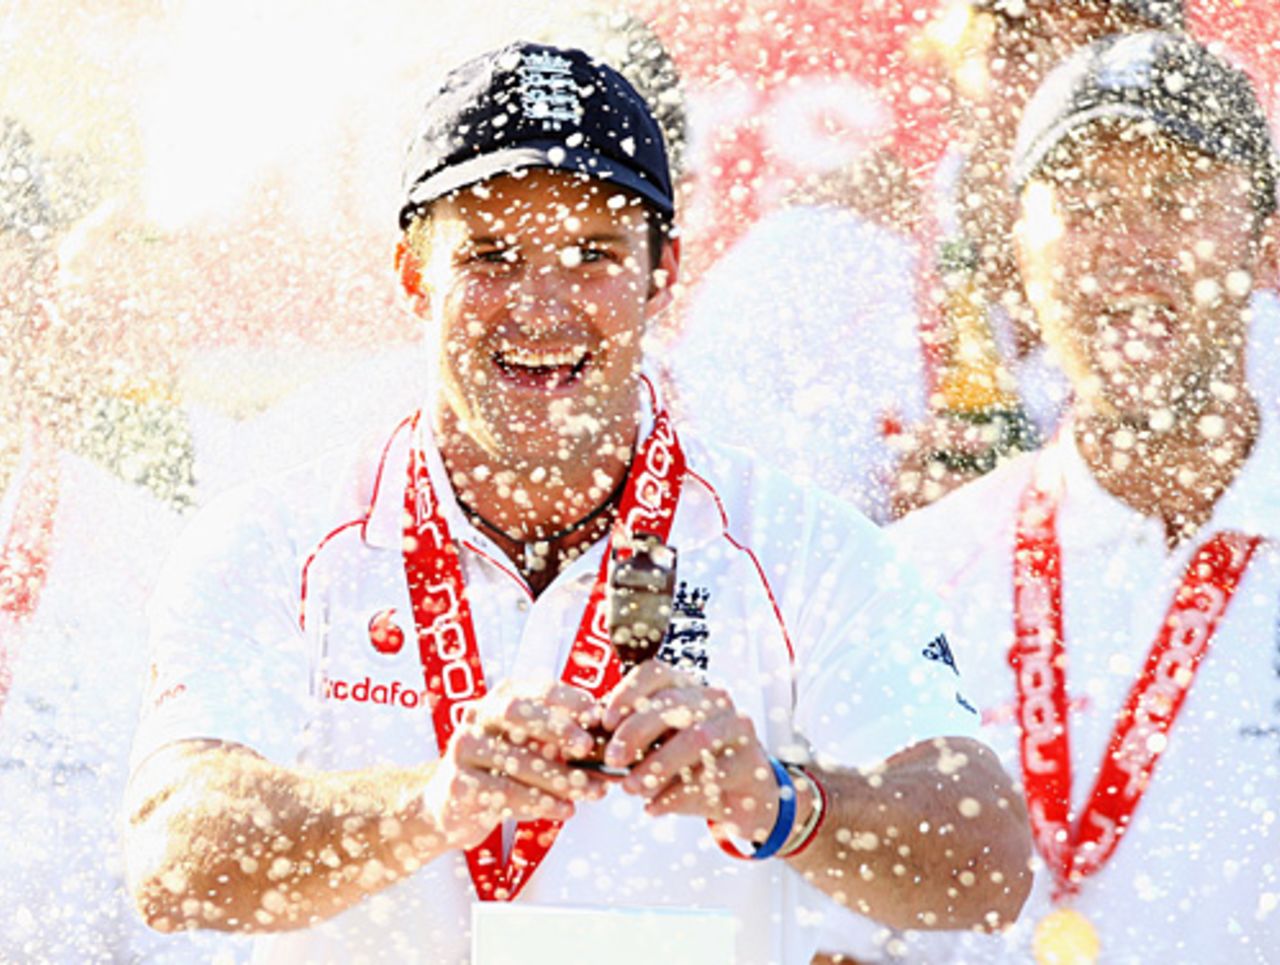 Andrew Strauss holds the Ashes urn under a shower of champagne, England v Australia, 5th Test, The Oval, 4th day, August 23, 2009